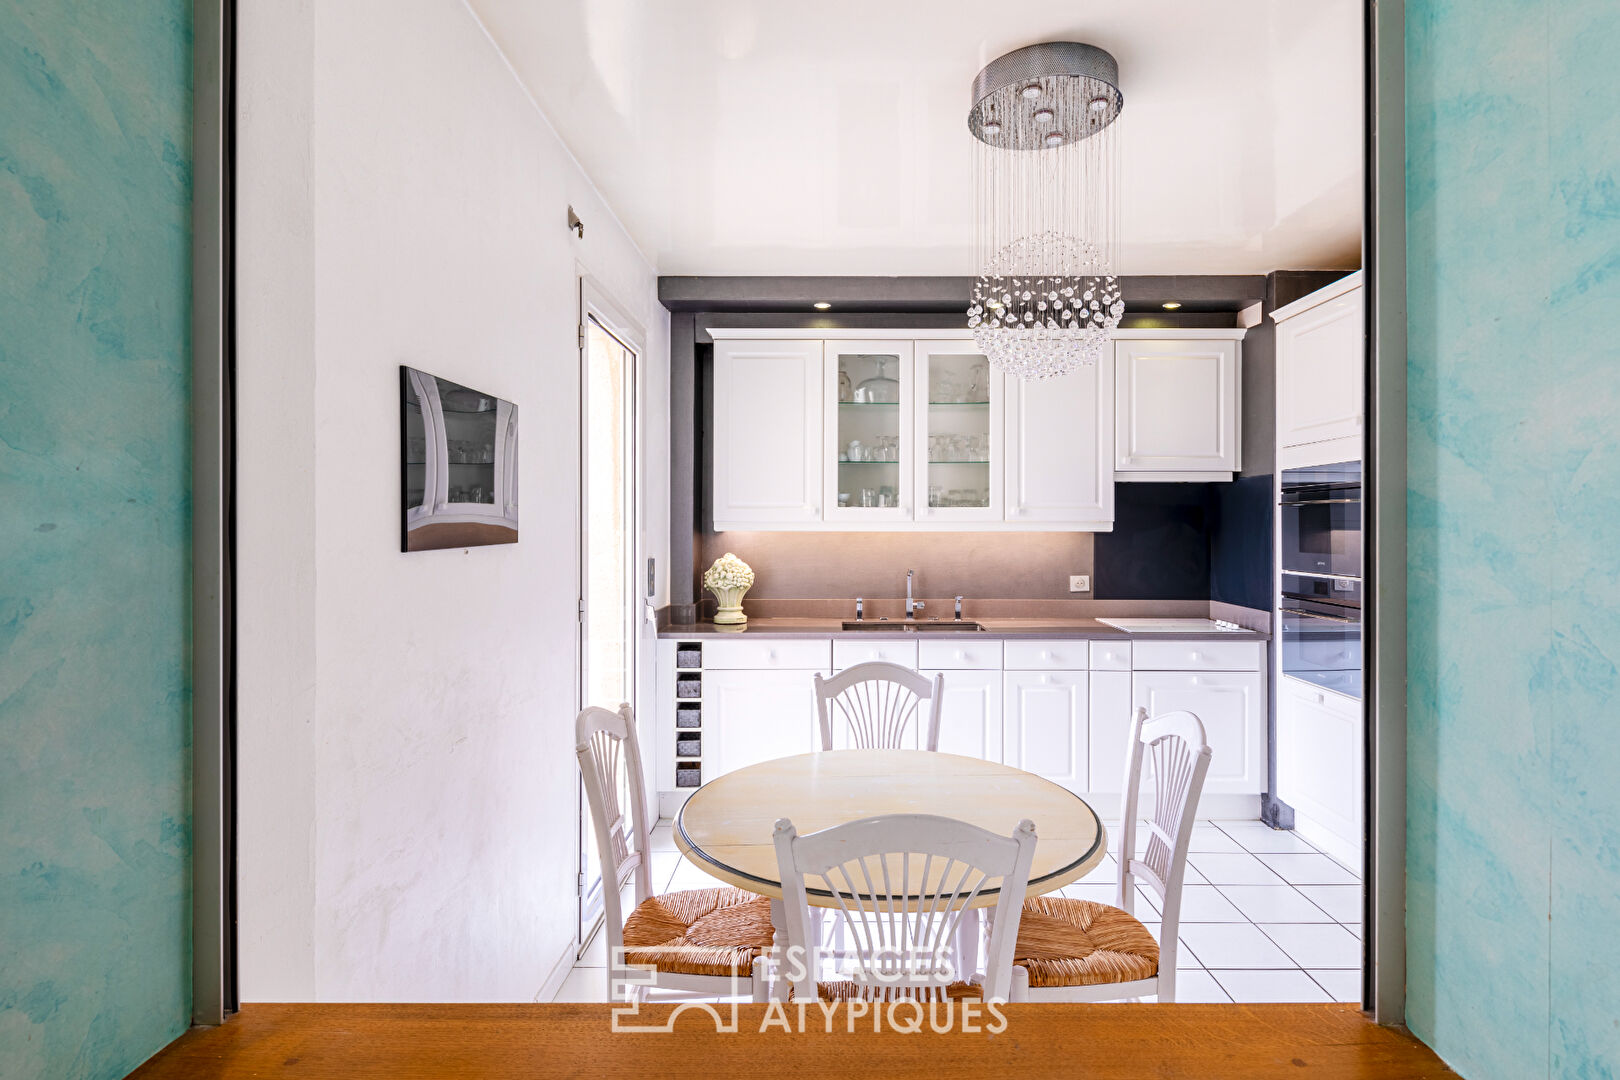 Architect-designed house nestled on the heights of Cormeilles-en-Parisis.